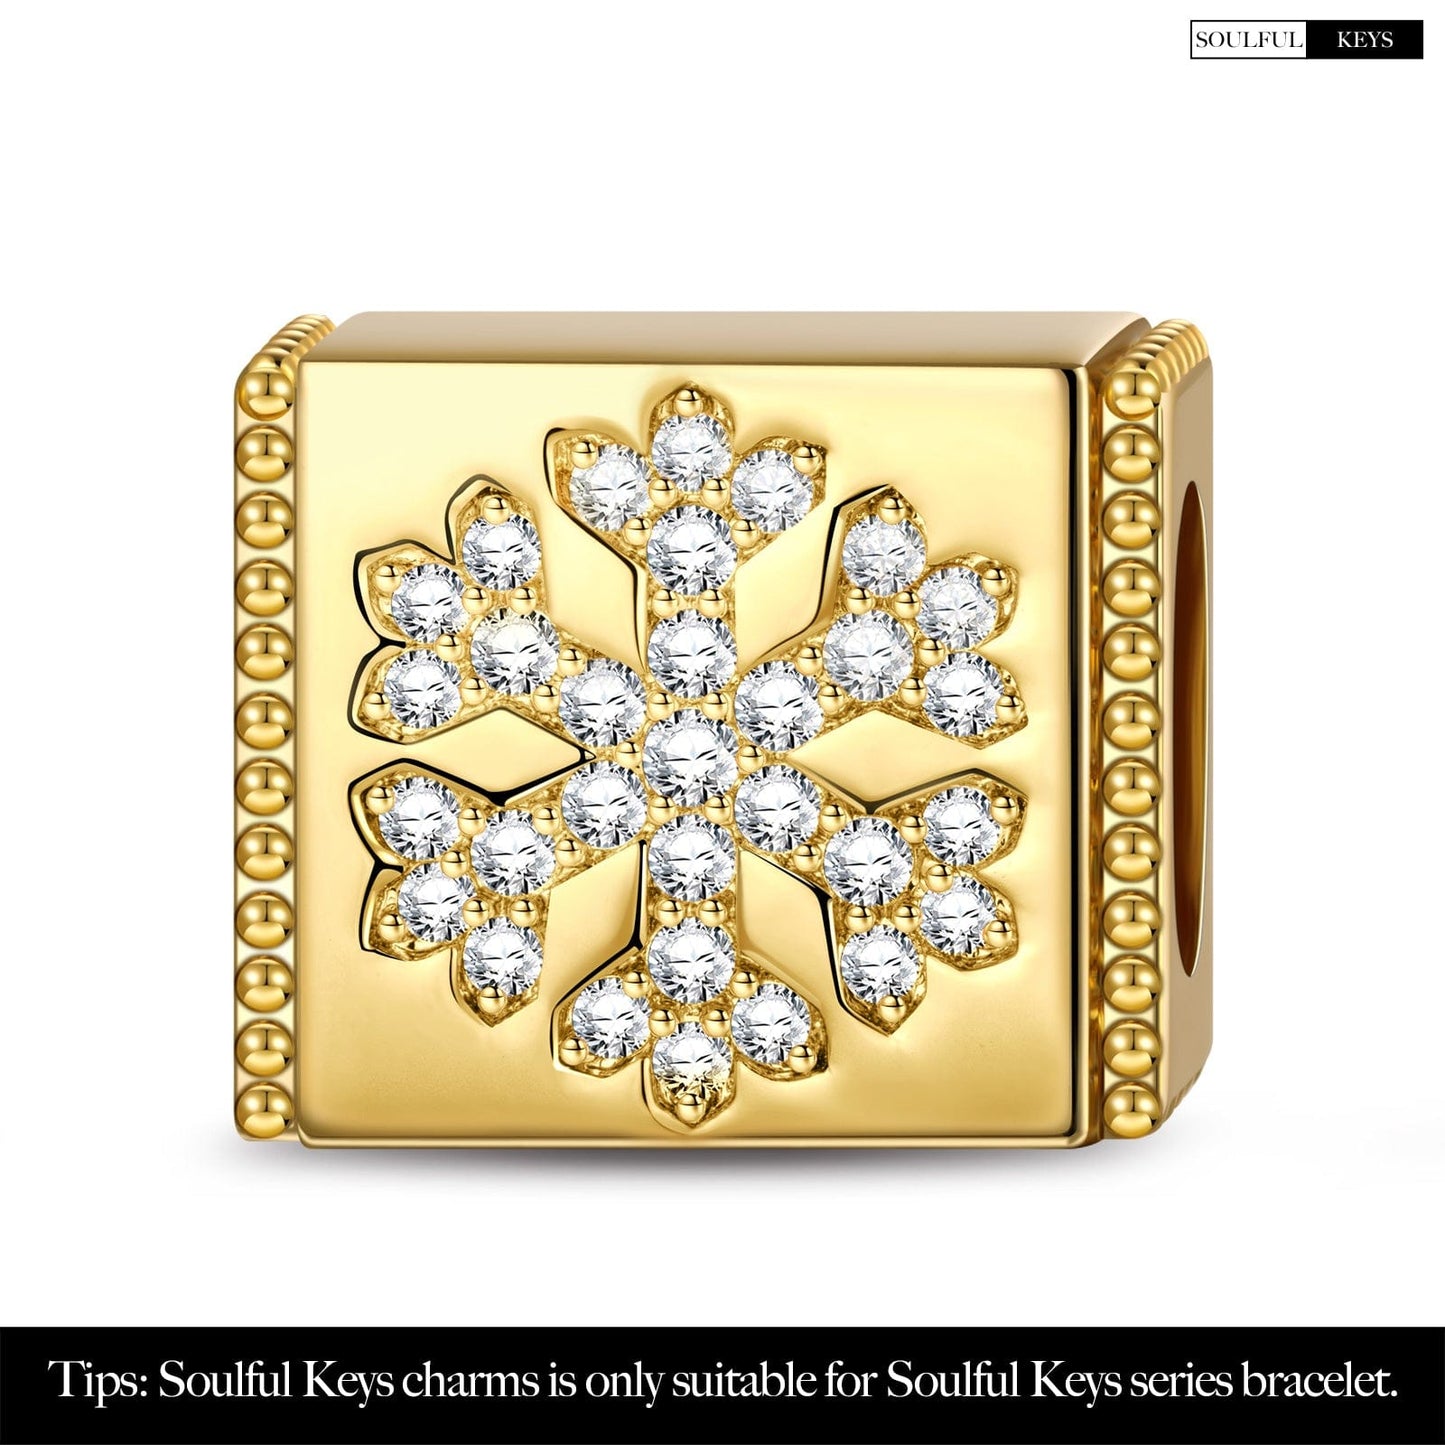 Snowflake Tarnish-resistant Silver Rectangular Charms In 14K Gold Plated